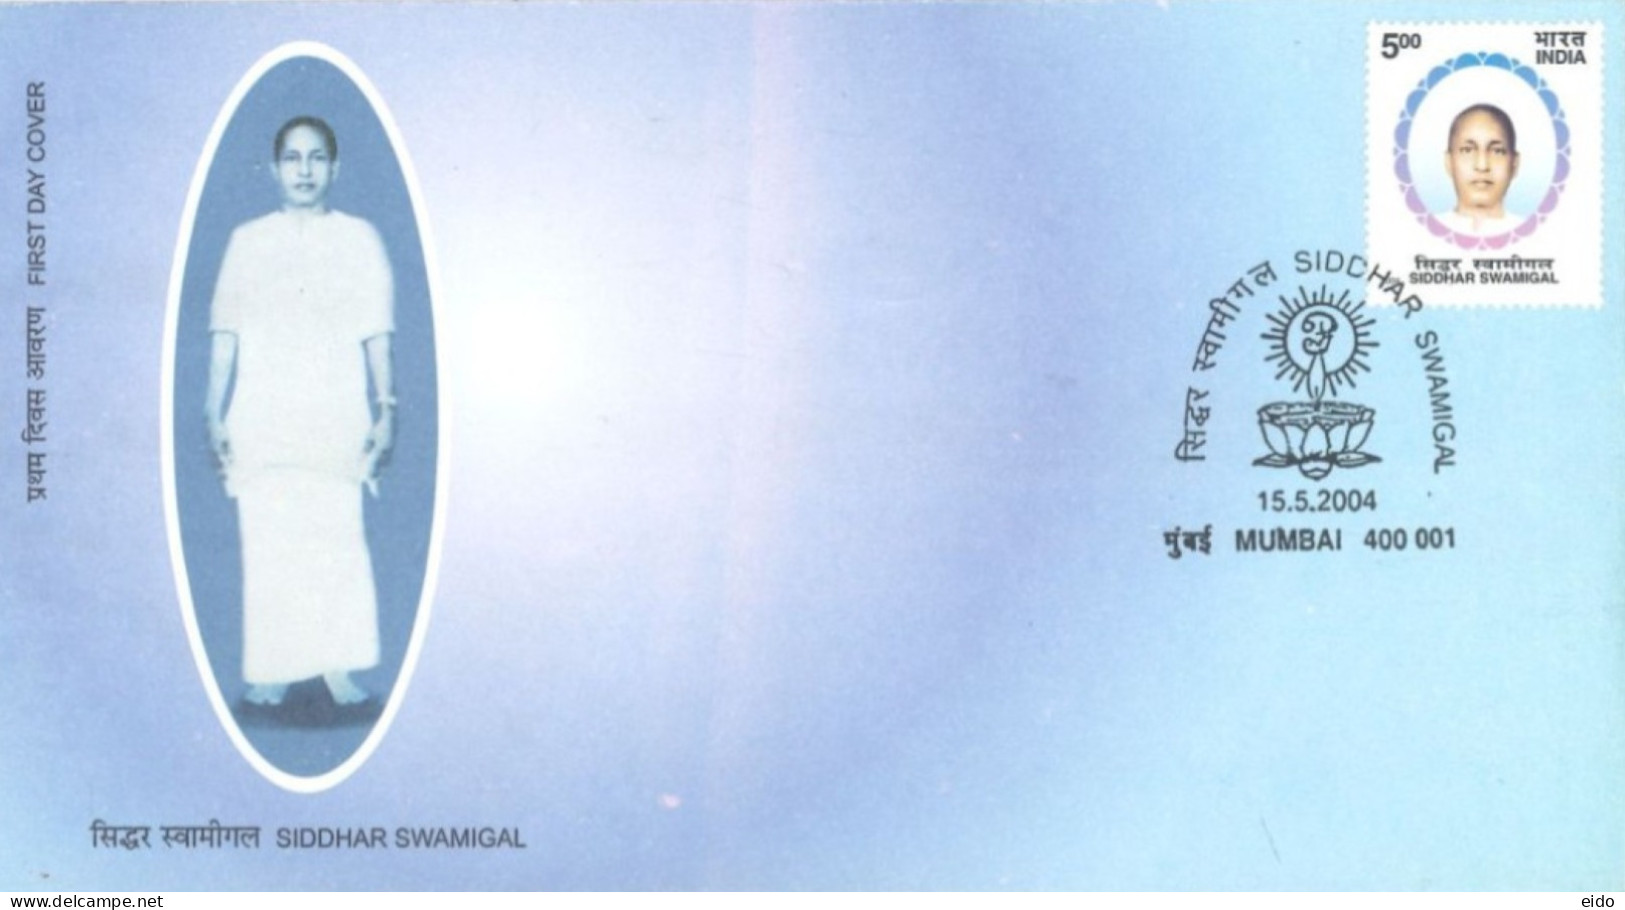 INDIA - 2004 - FDC STAMP OF SIDDHAR SWAMIGAL. - Covers & Documents